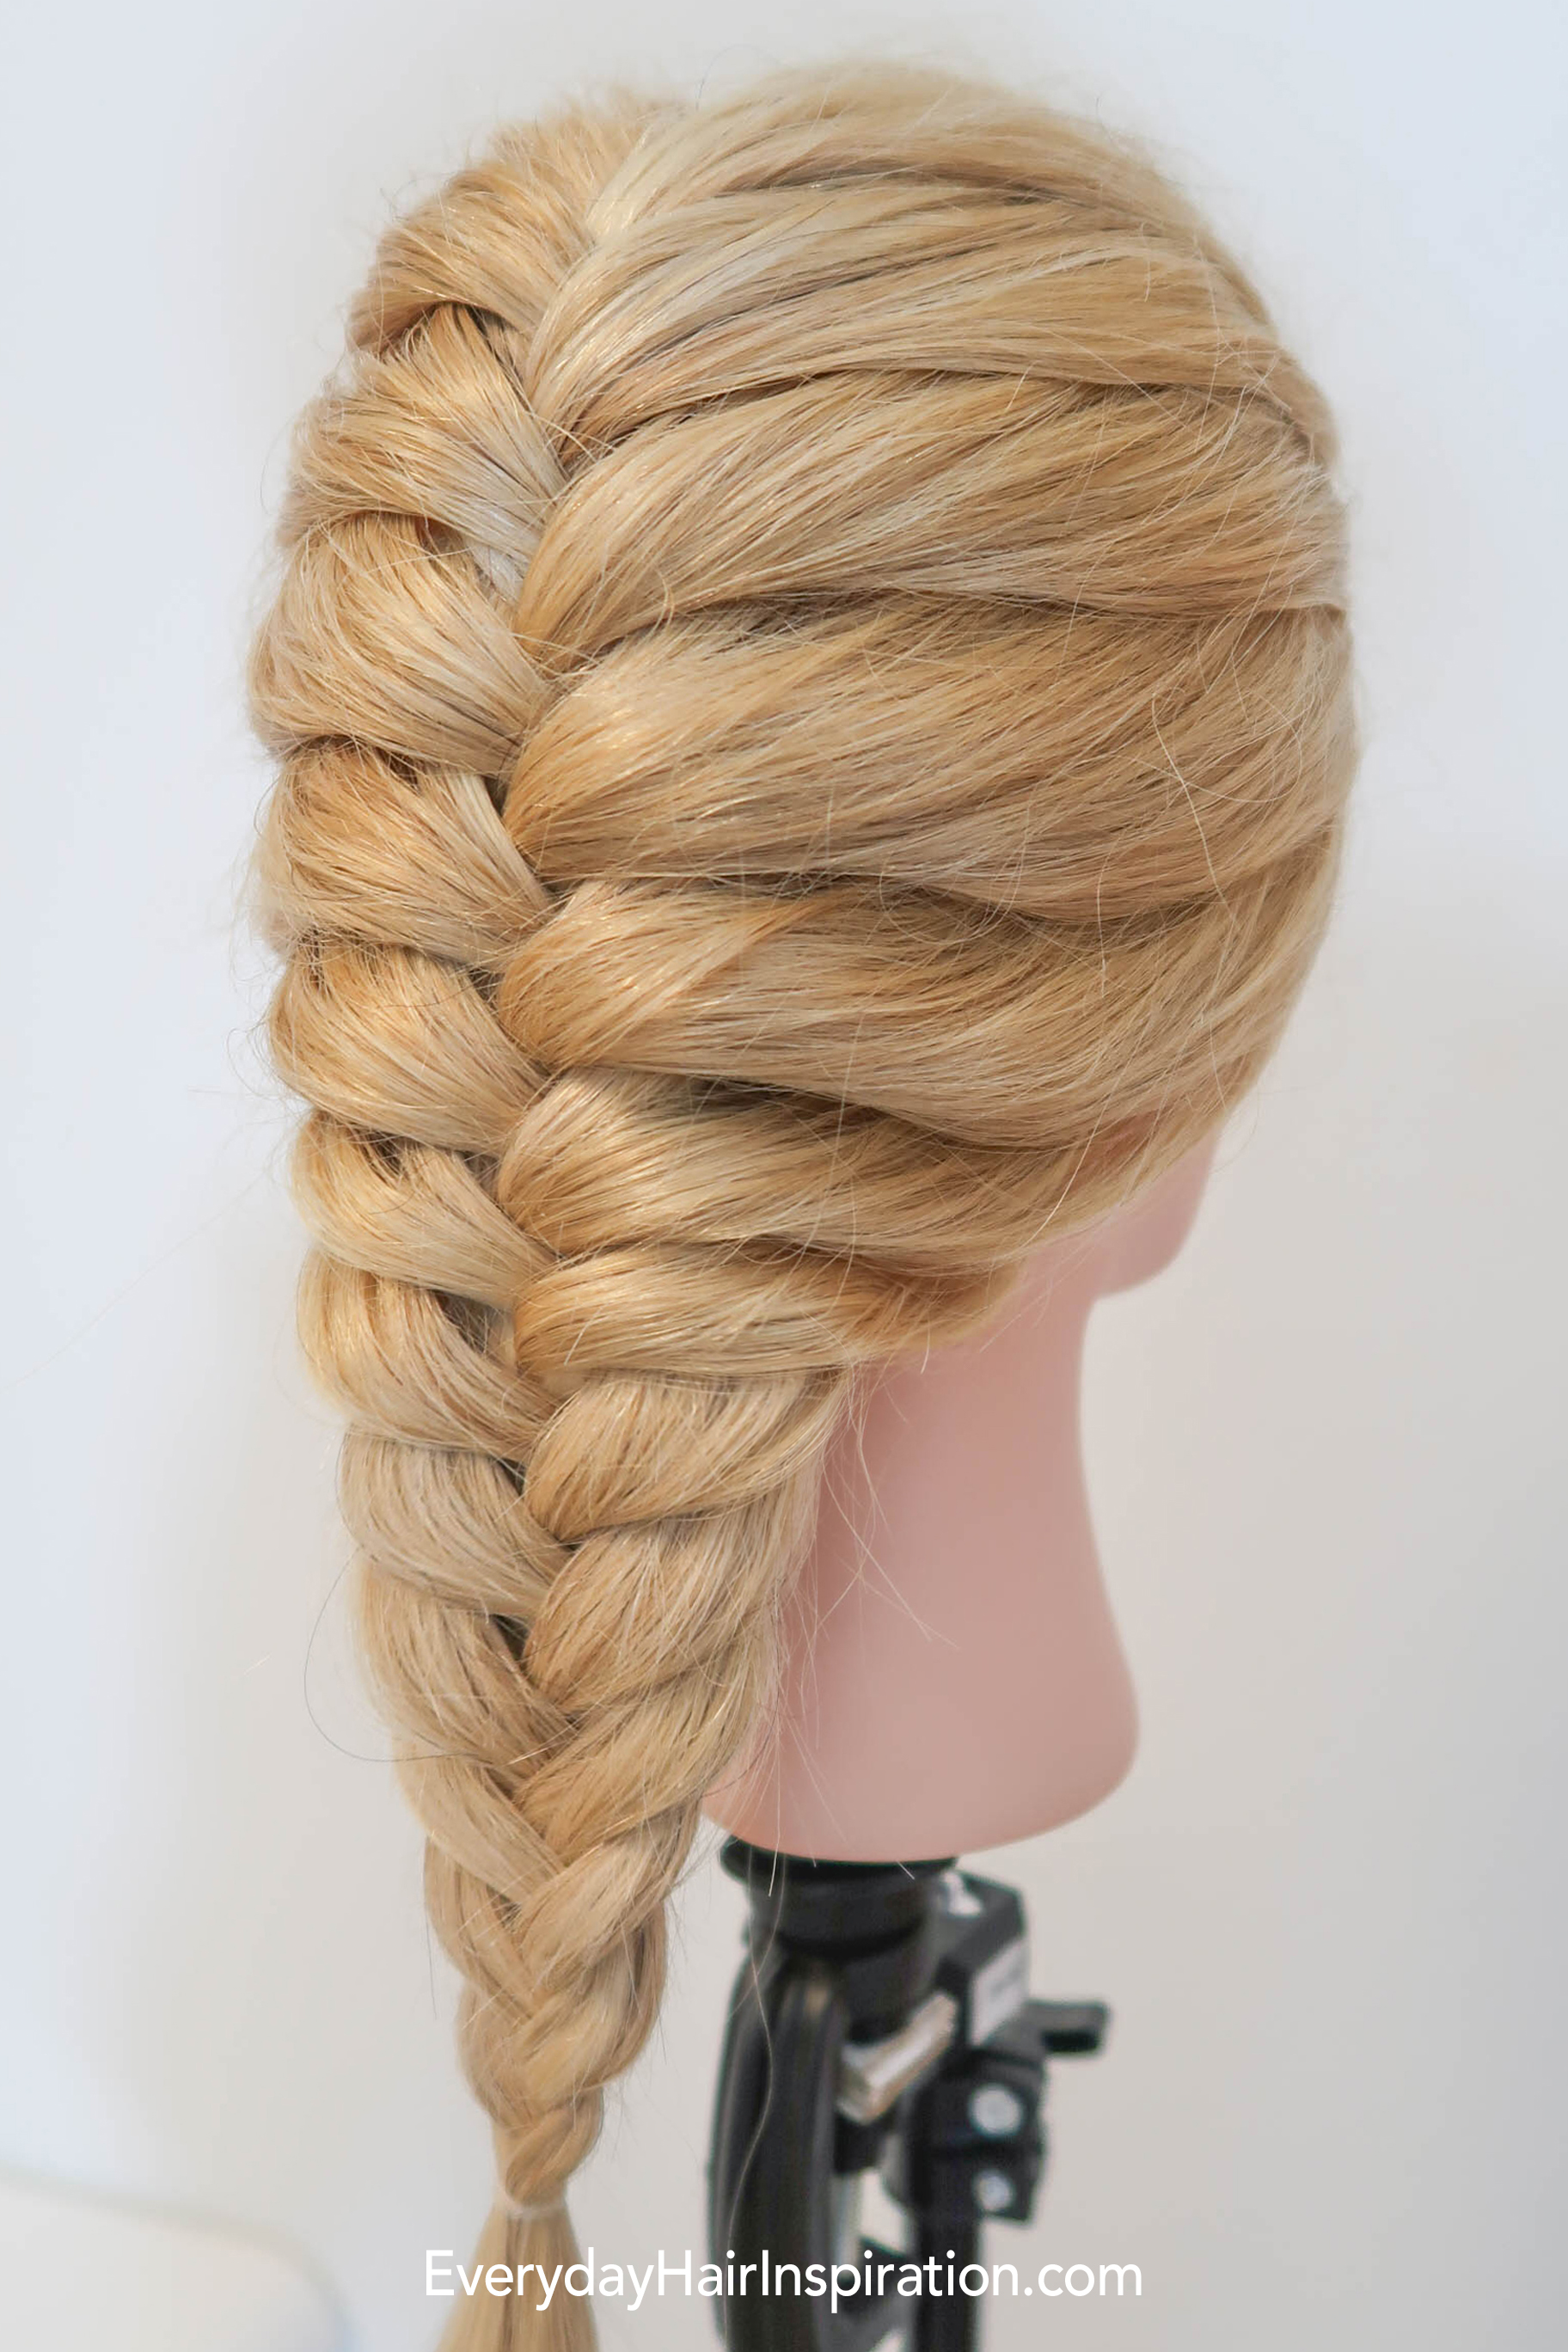 How To Faux French Braid - Everyday Hair inspiration